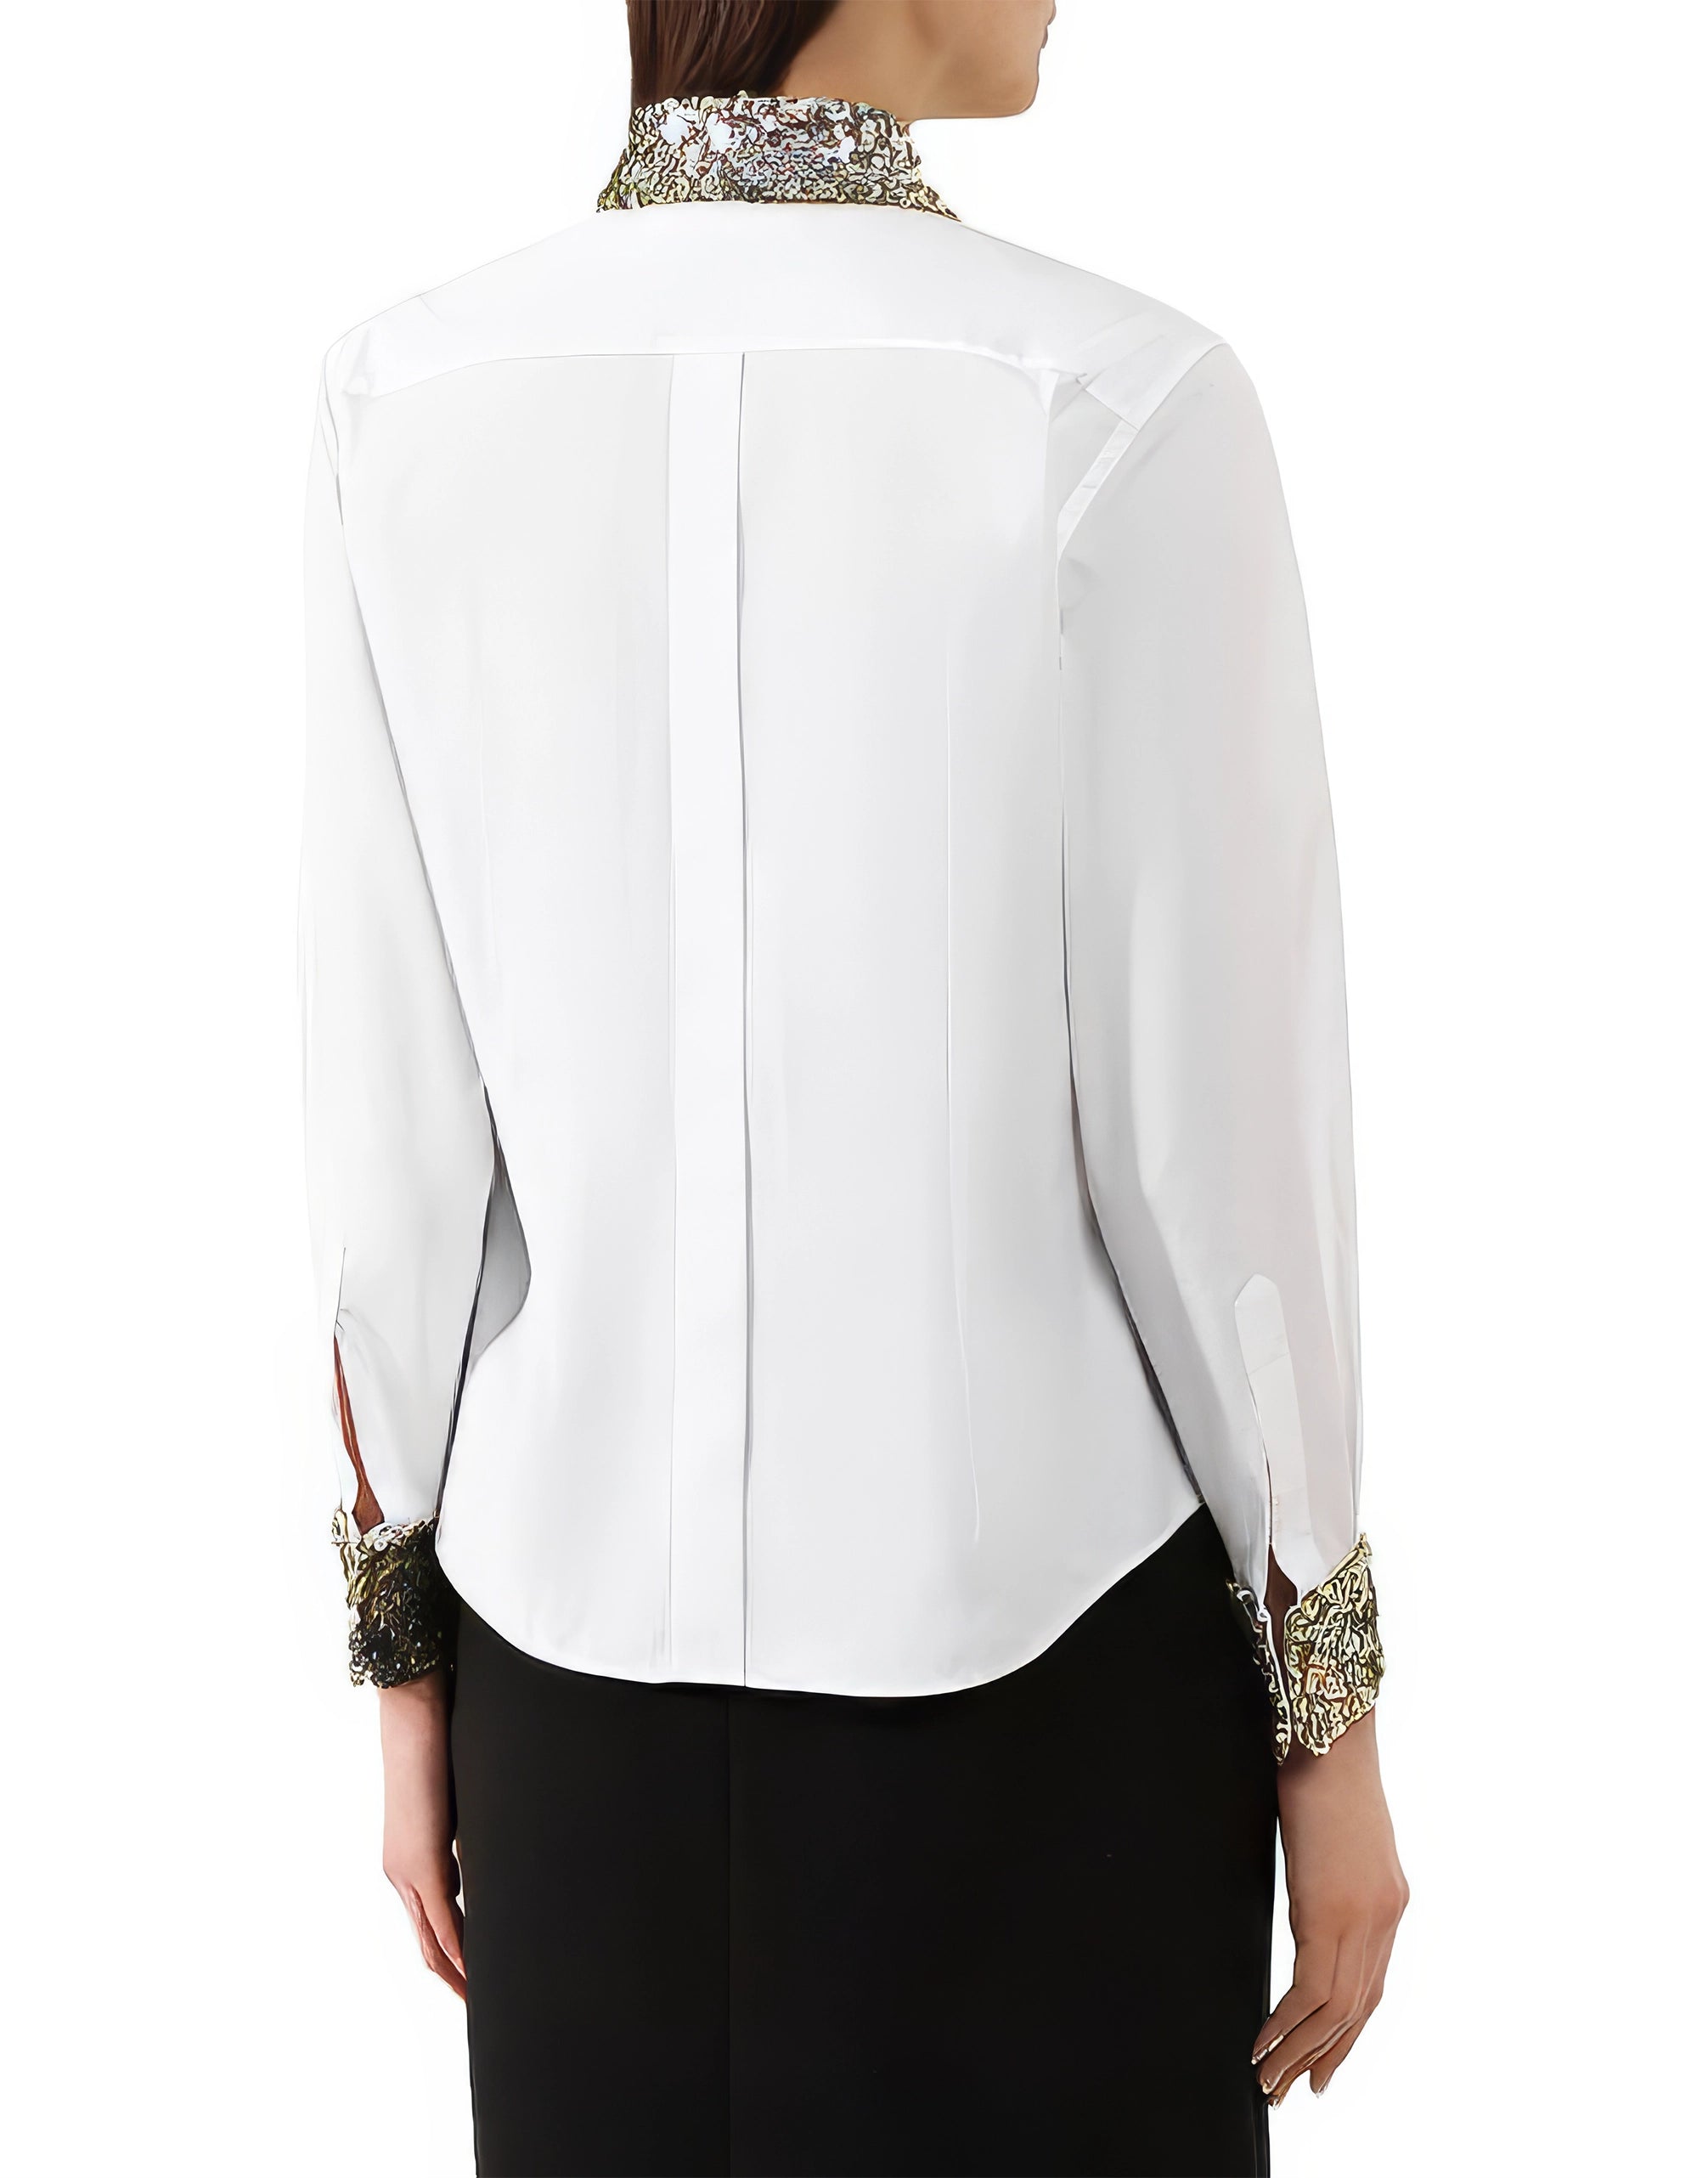 Shirt With Sequined Collar And Cuffs